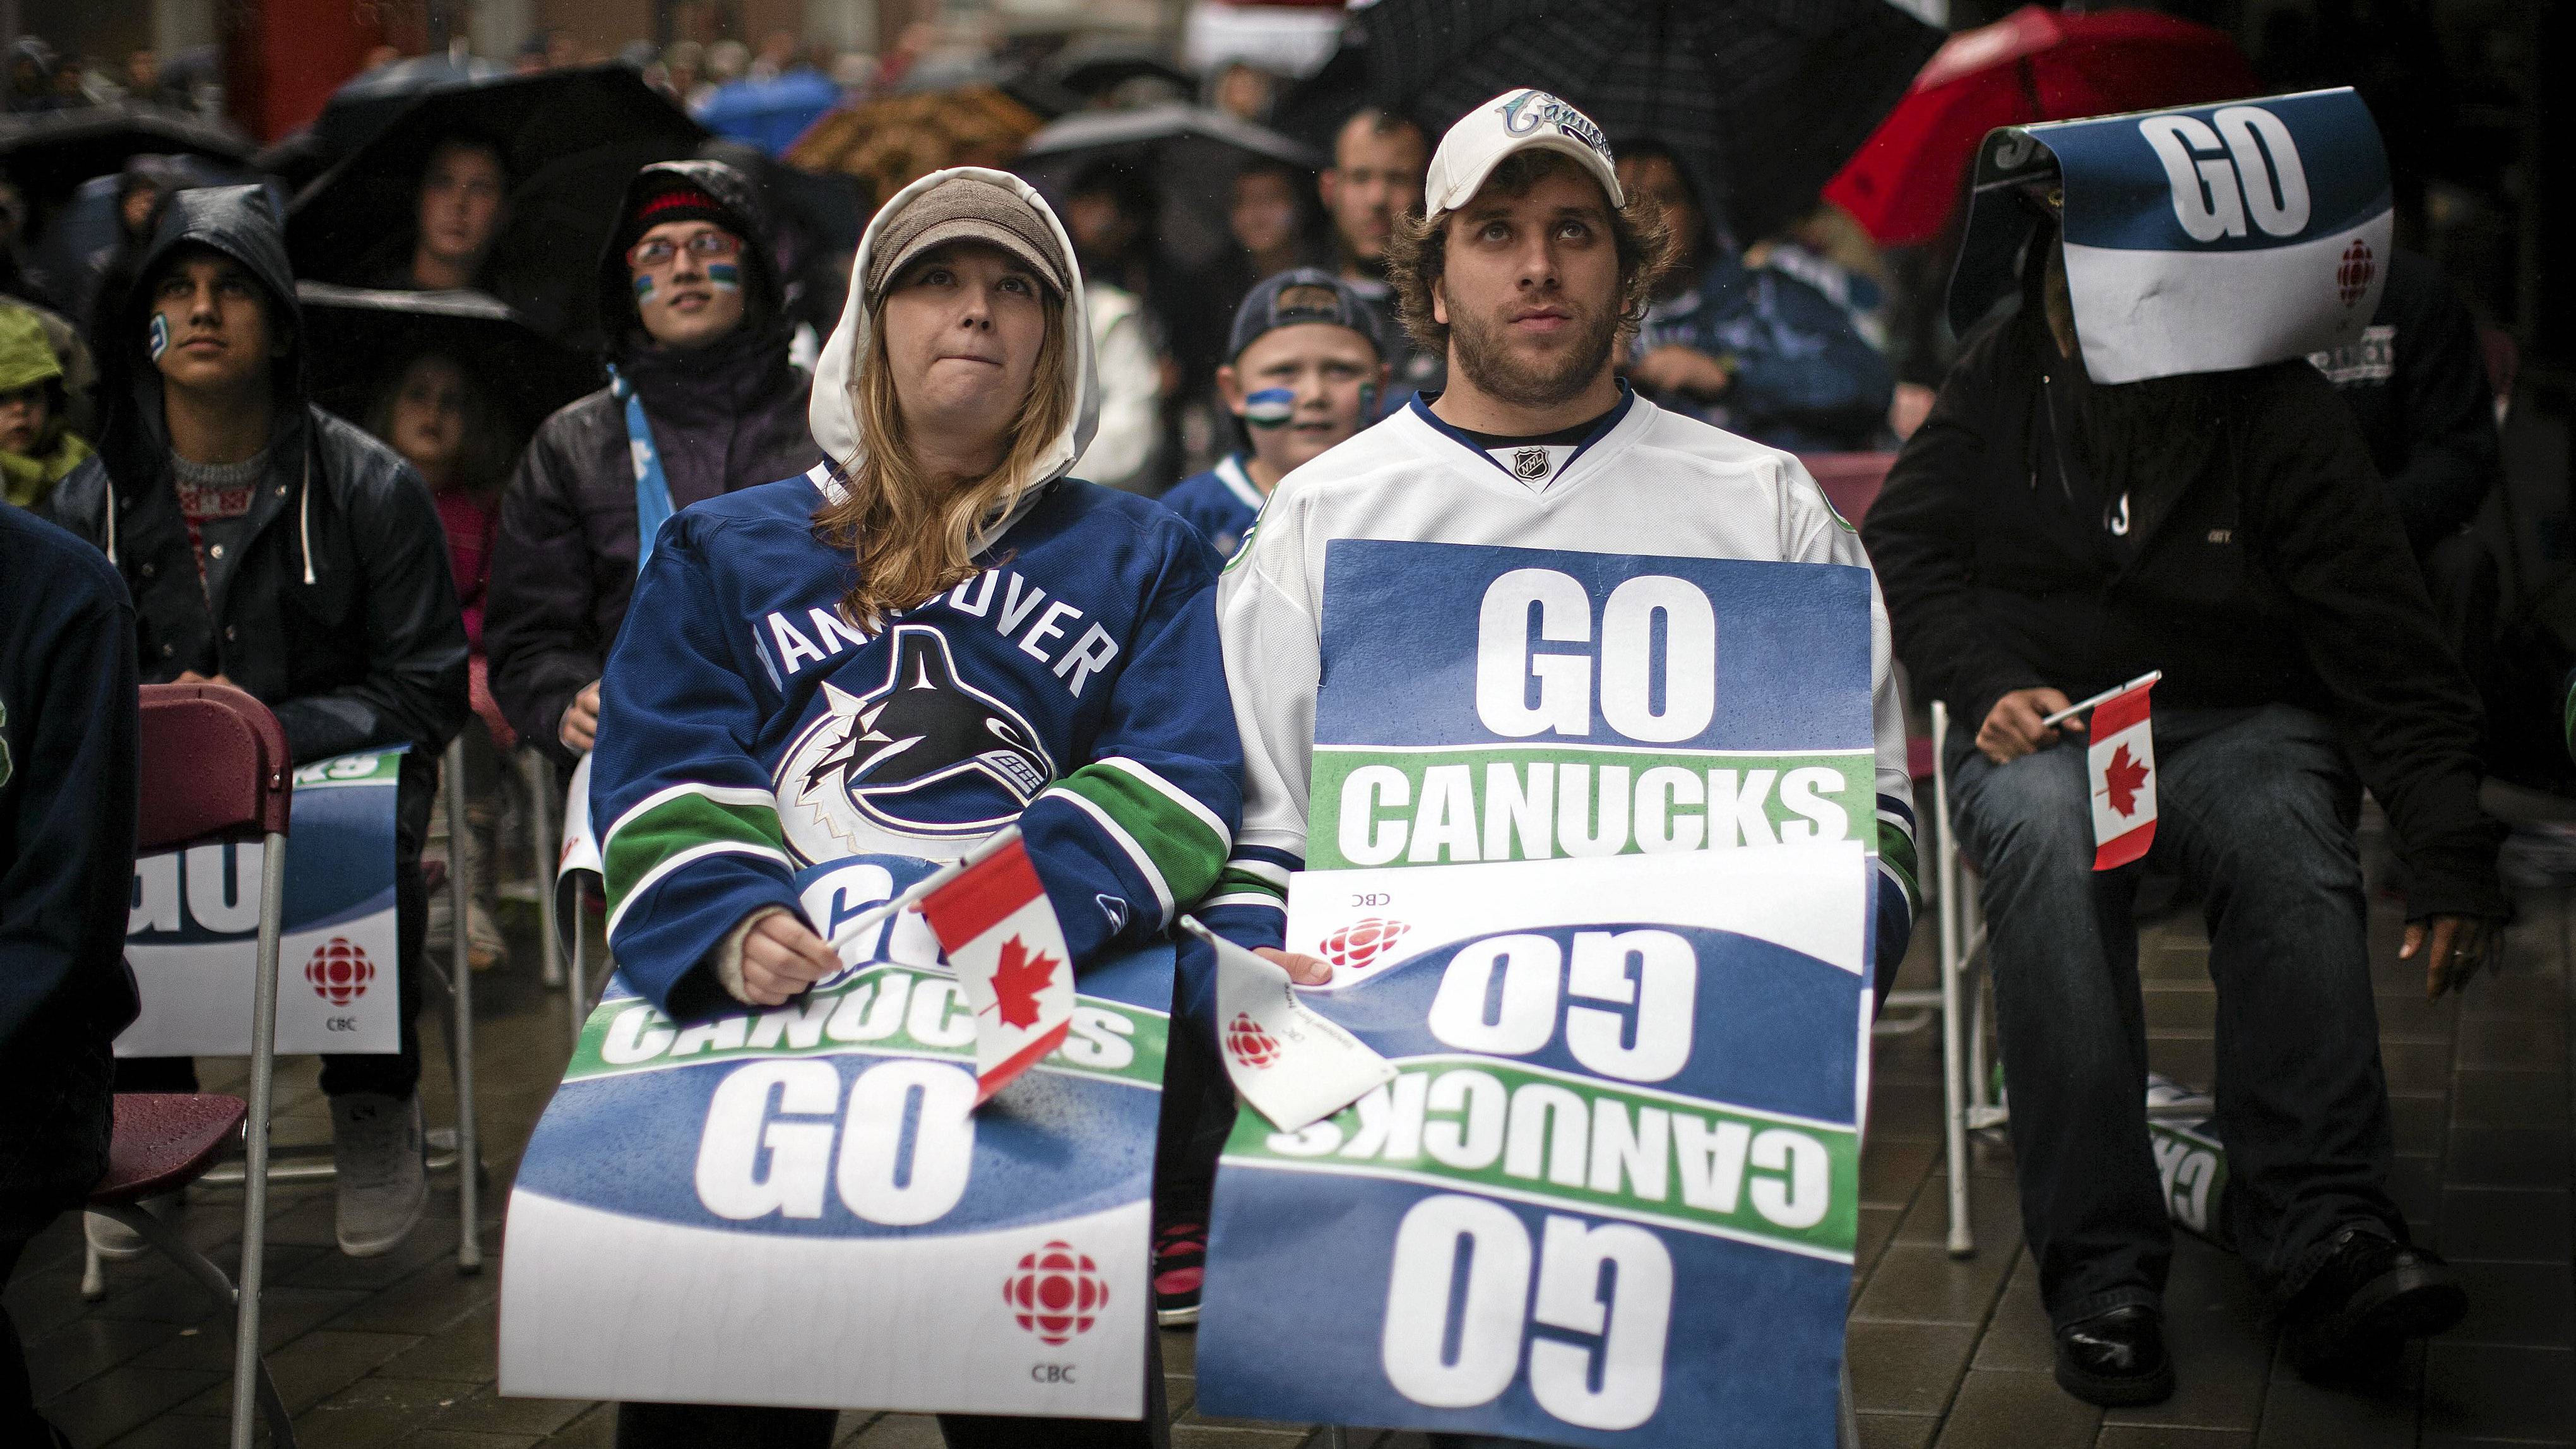 Vancouver Canucks fans arrive for the Stanley Cup Final between